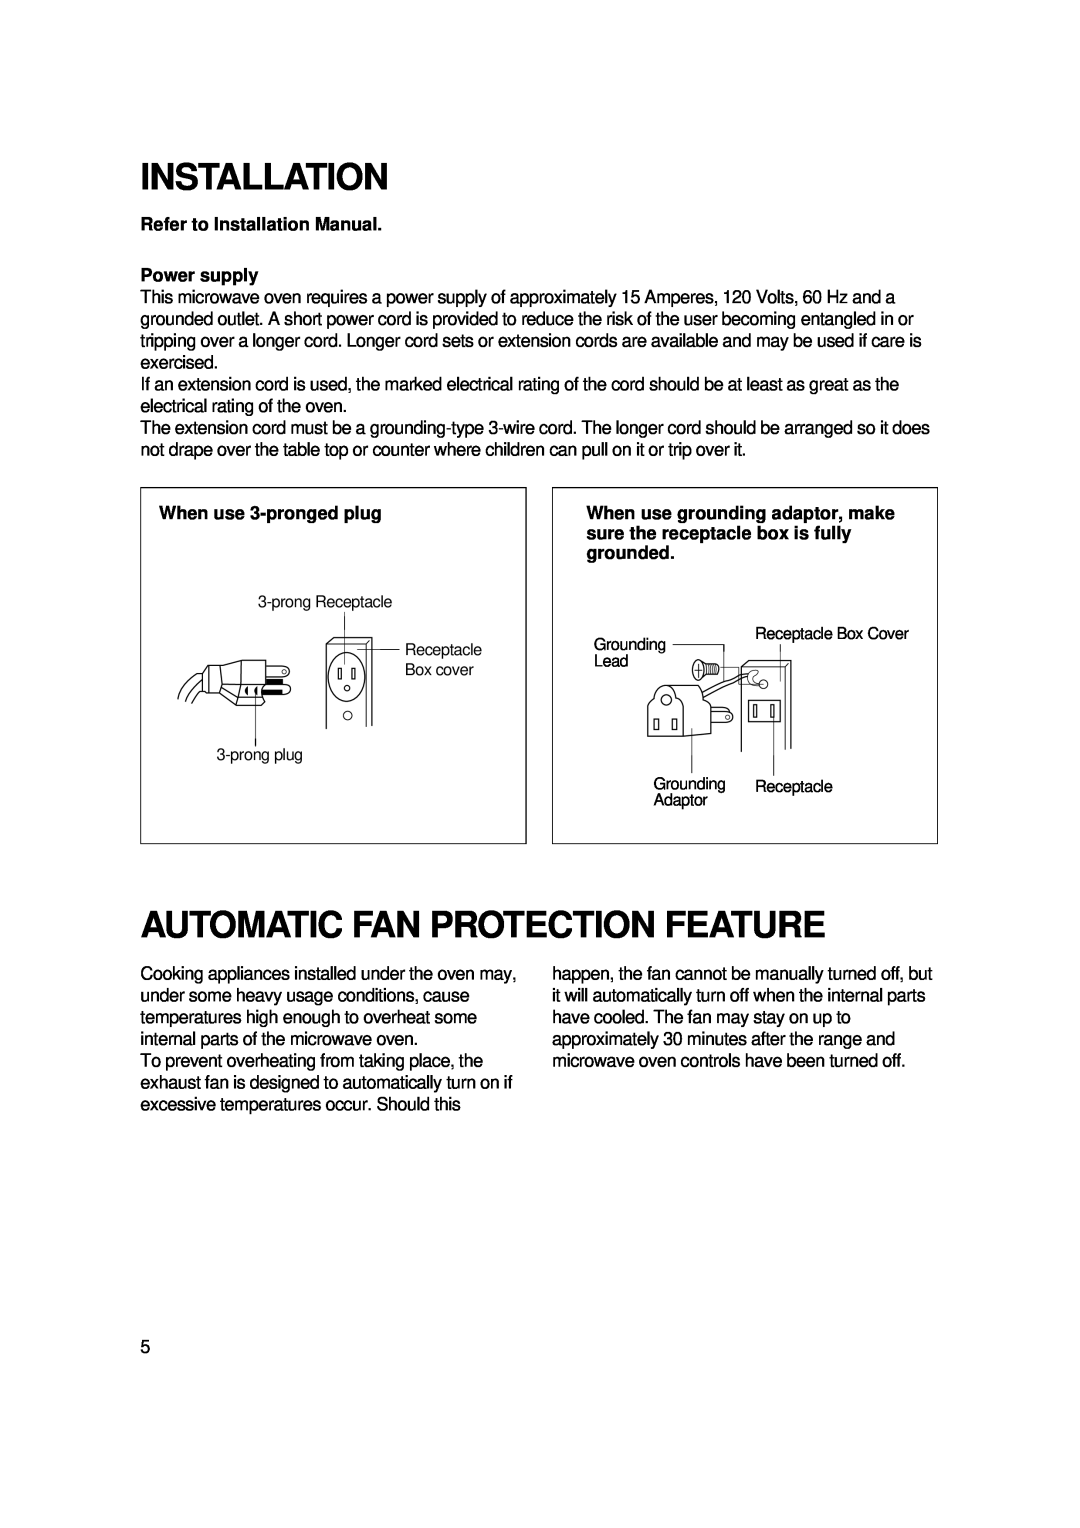 Magic Chef MCO2212ARW manual Automatic Fan Protection Feature, Refer to Installation Manual Power supply 